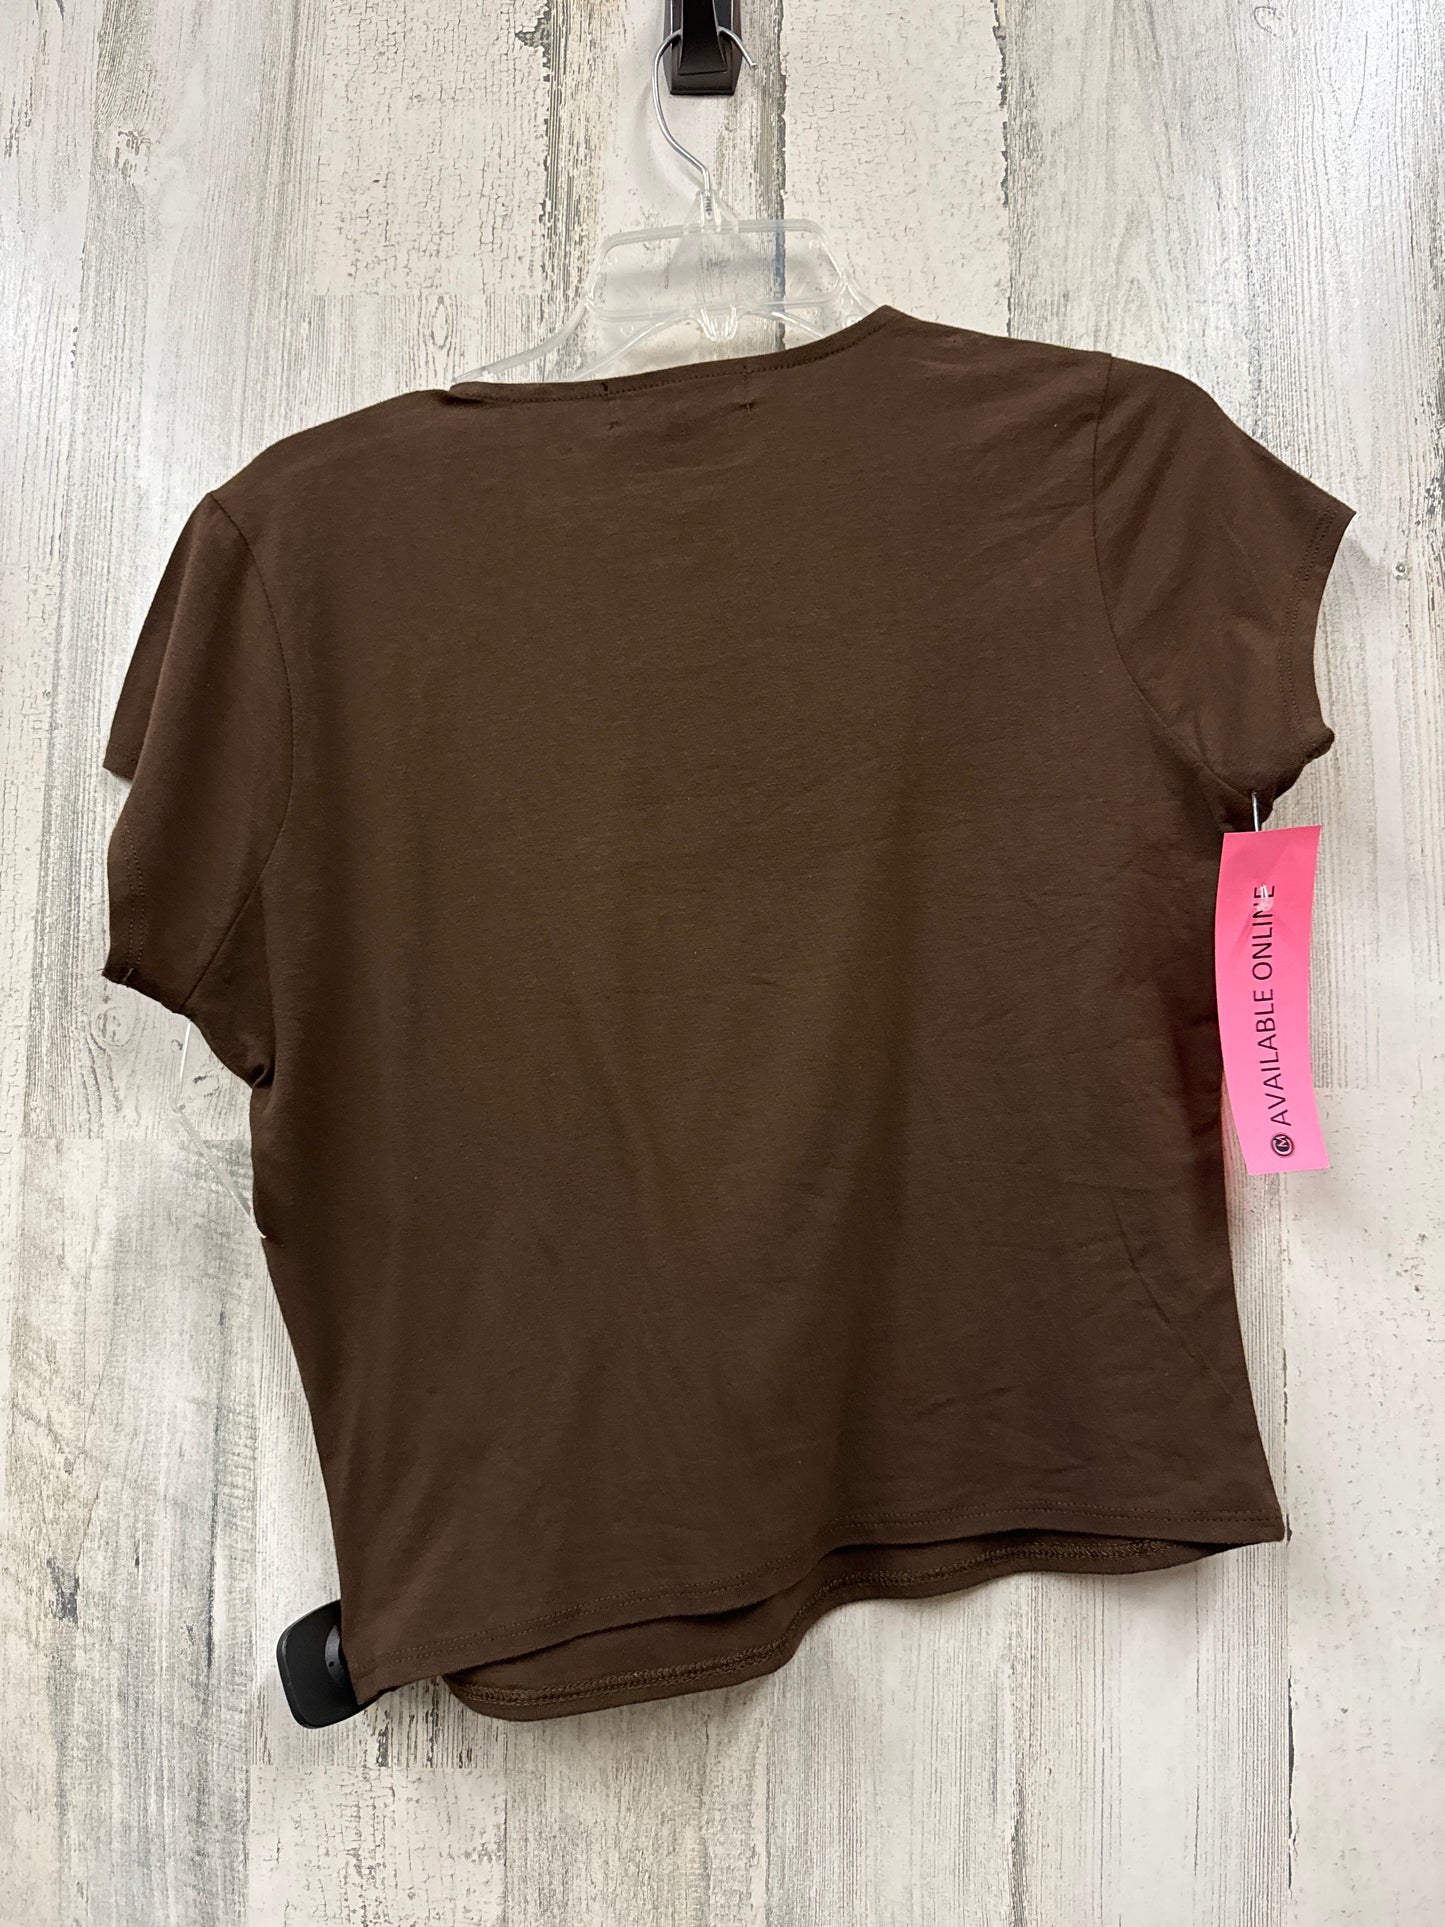 Brown Top Short Sleeve Vibe, Size Xl